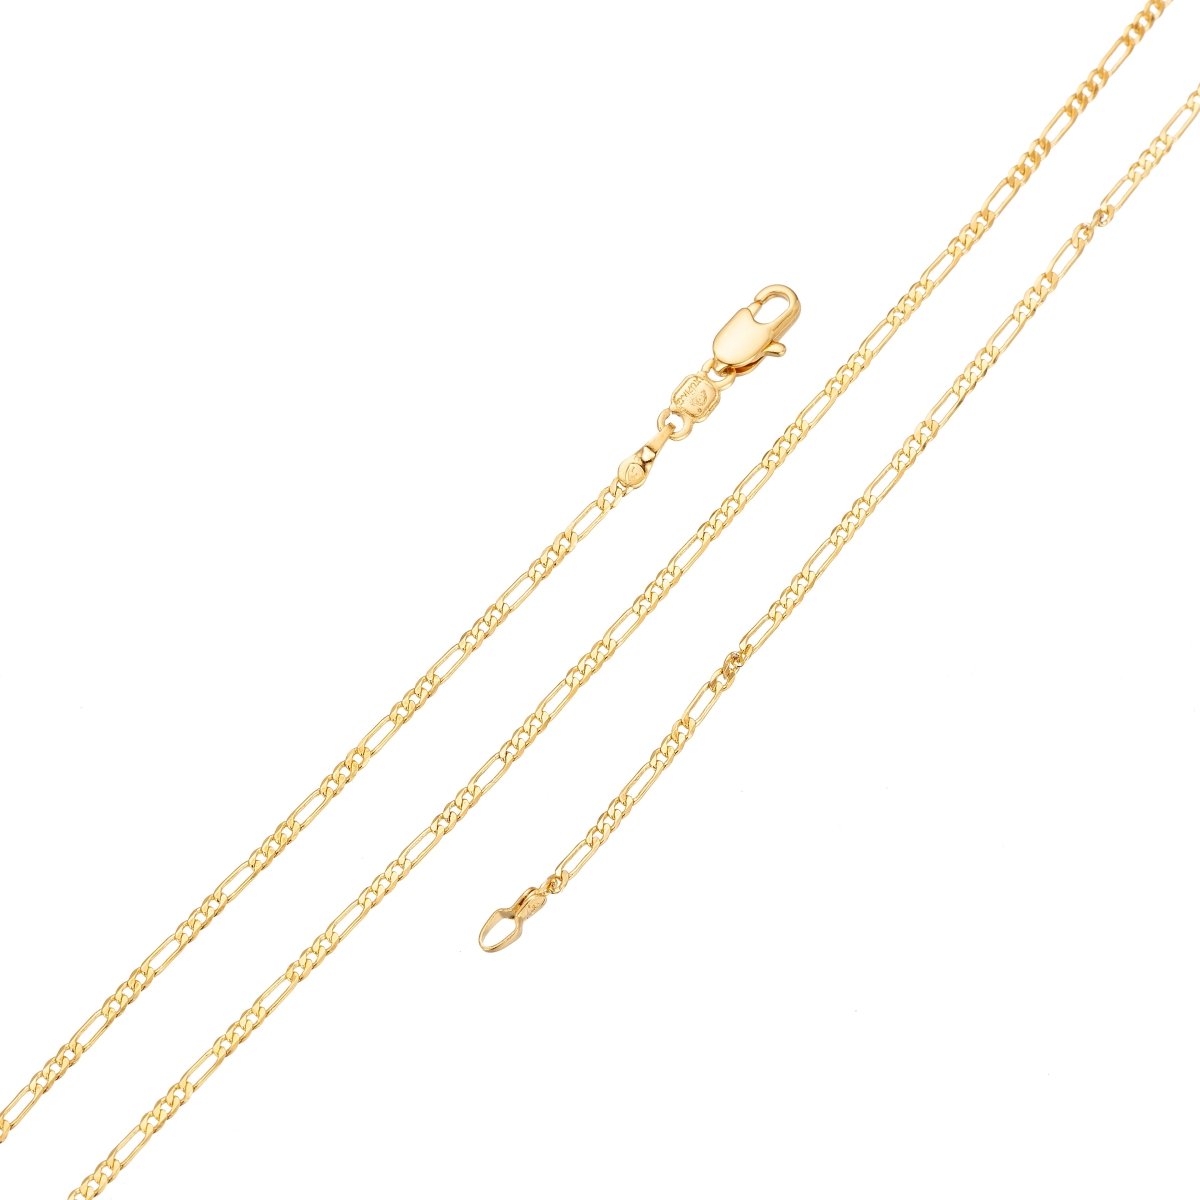 24K Gold Filled Figaro Chain Necklace, 19.5 inch Figaro Finished Necklace For Jewelry Making, Dainty 2mm Figaro Necklace w/ Lobster Clasps | CN-049 WA-777 - DLUXCA